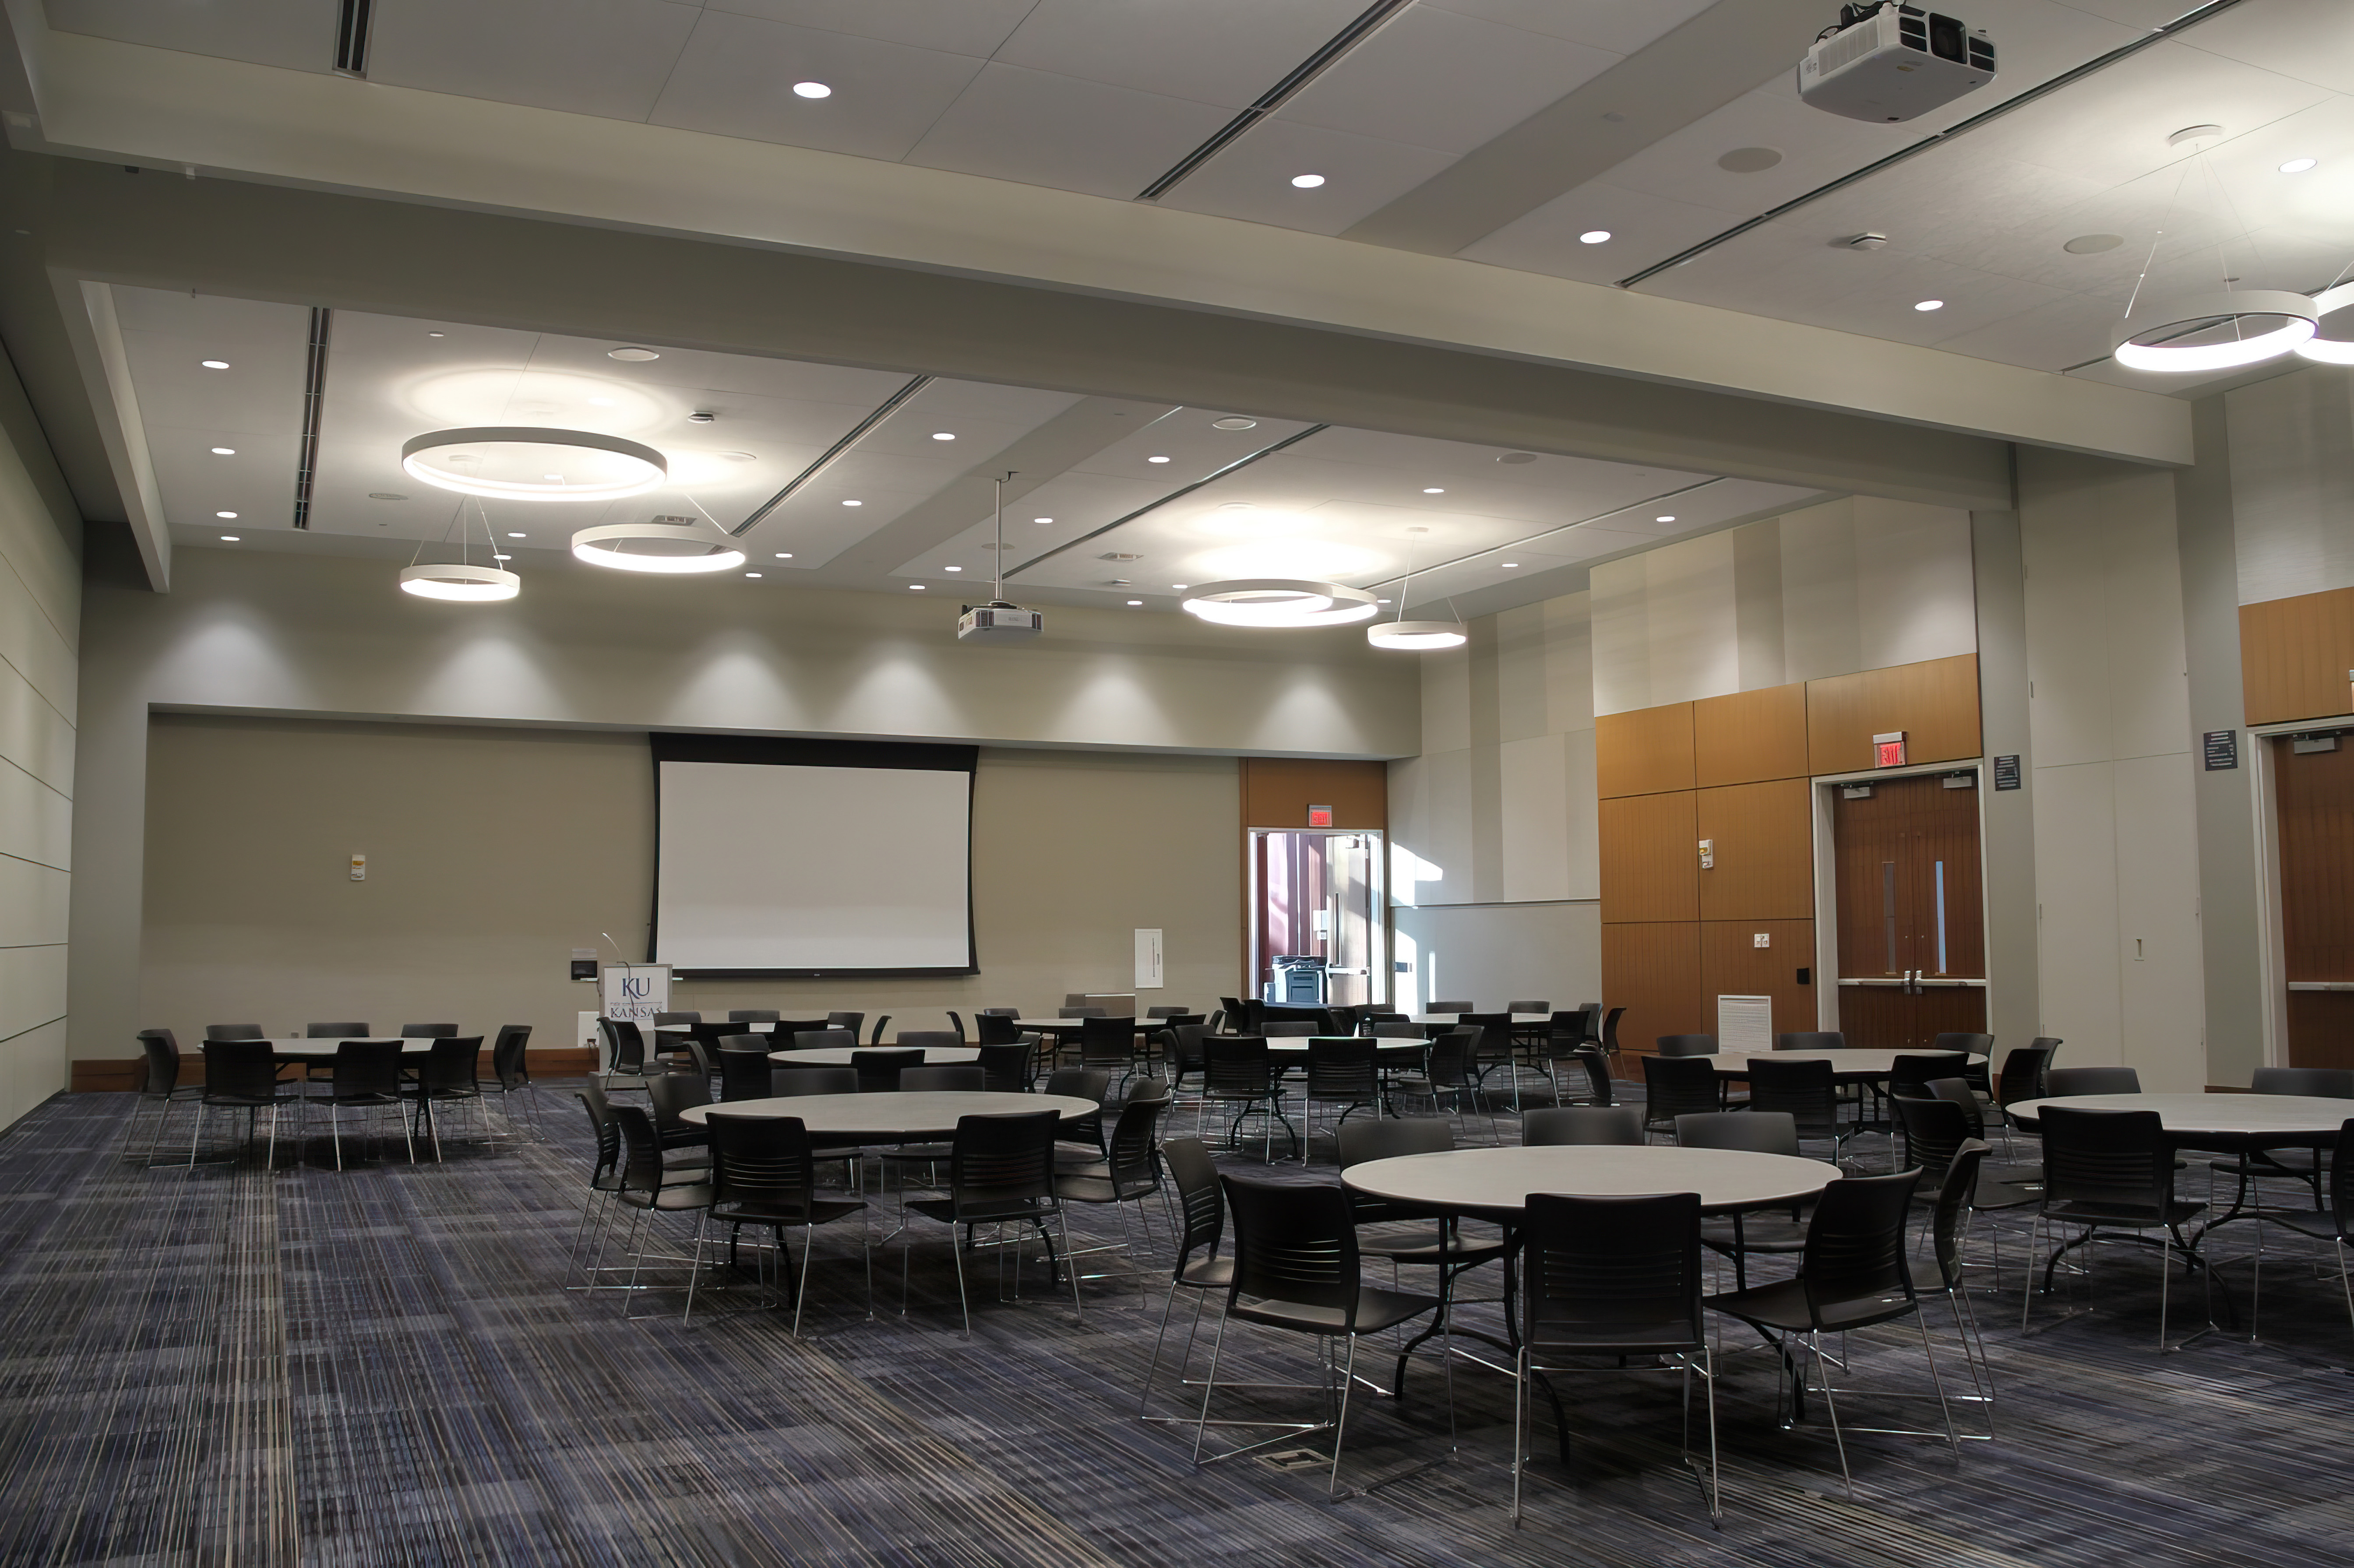 A conference room, Forum AB, filled with round tables and chairs, a projector screen at the front, and hanging circular lighting